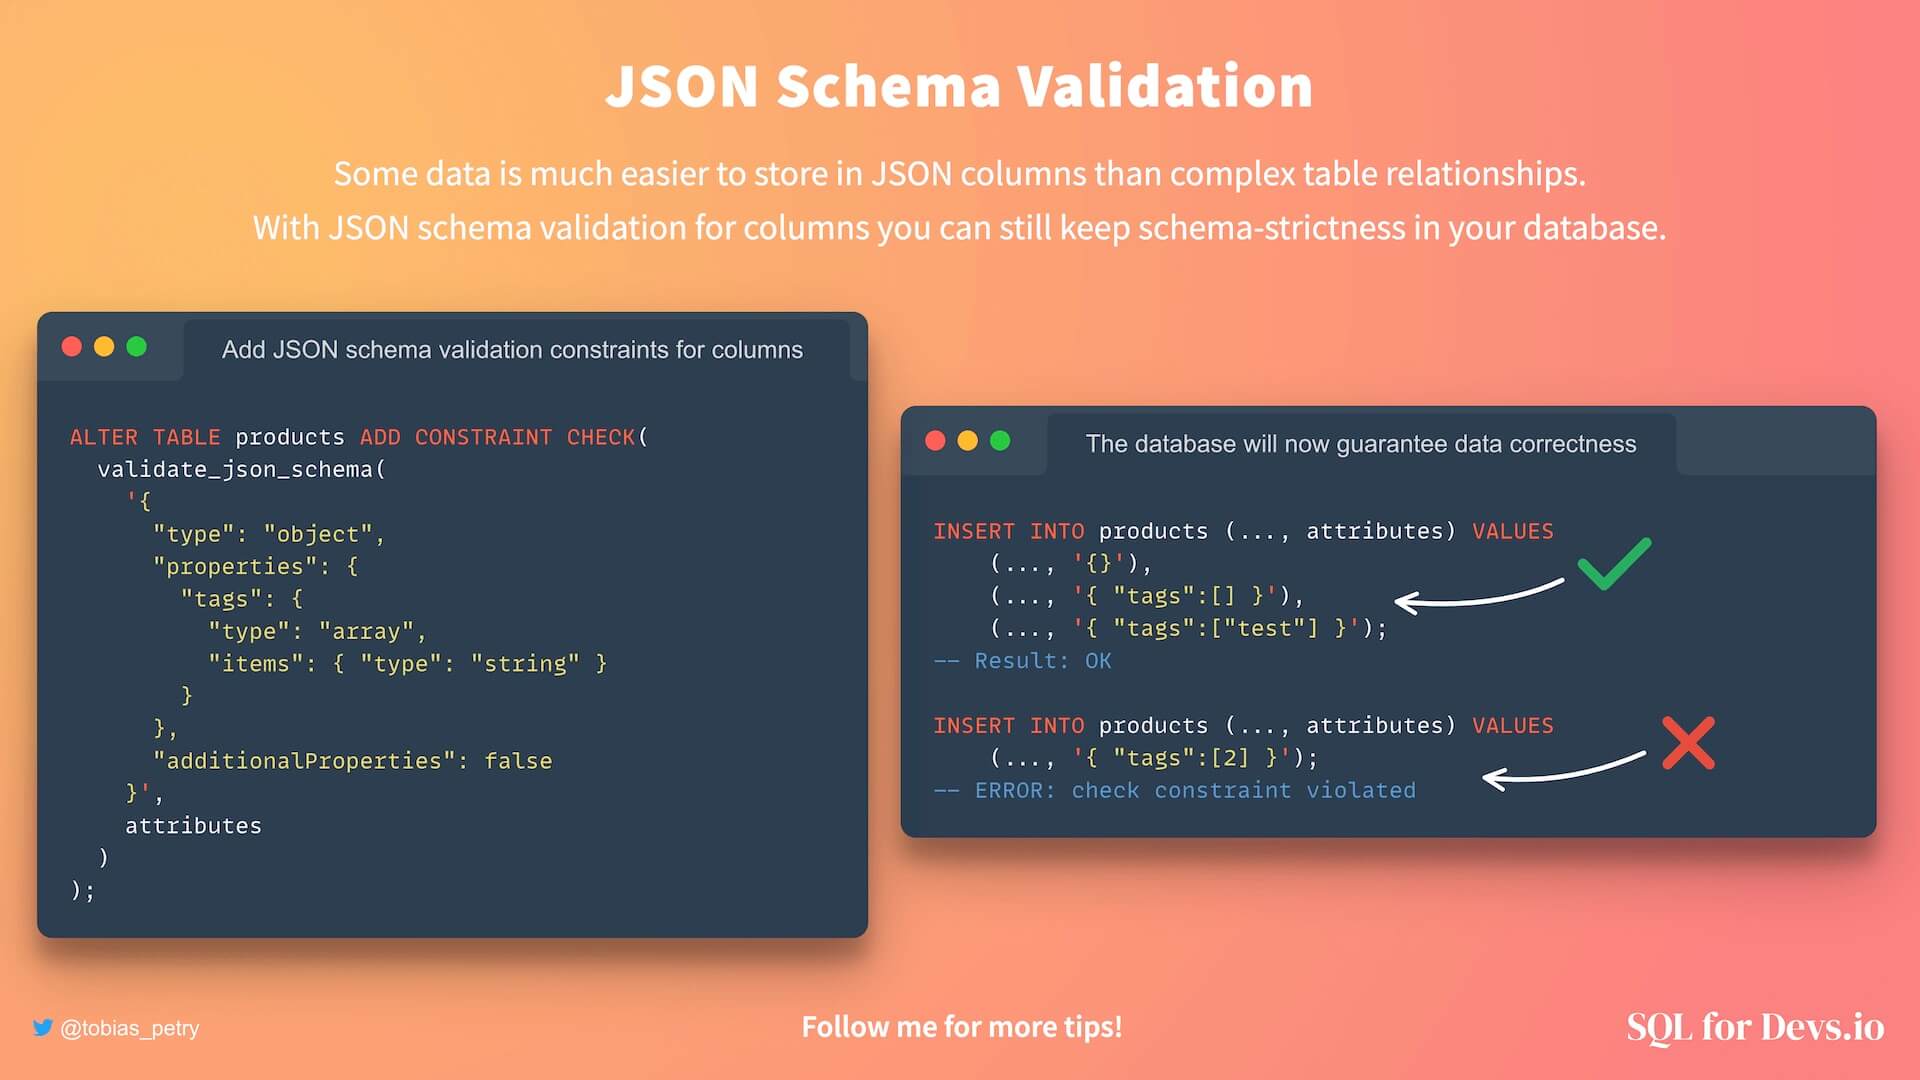 You can validate JSON columns at the database level